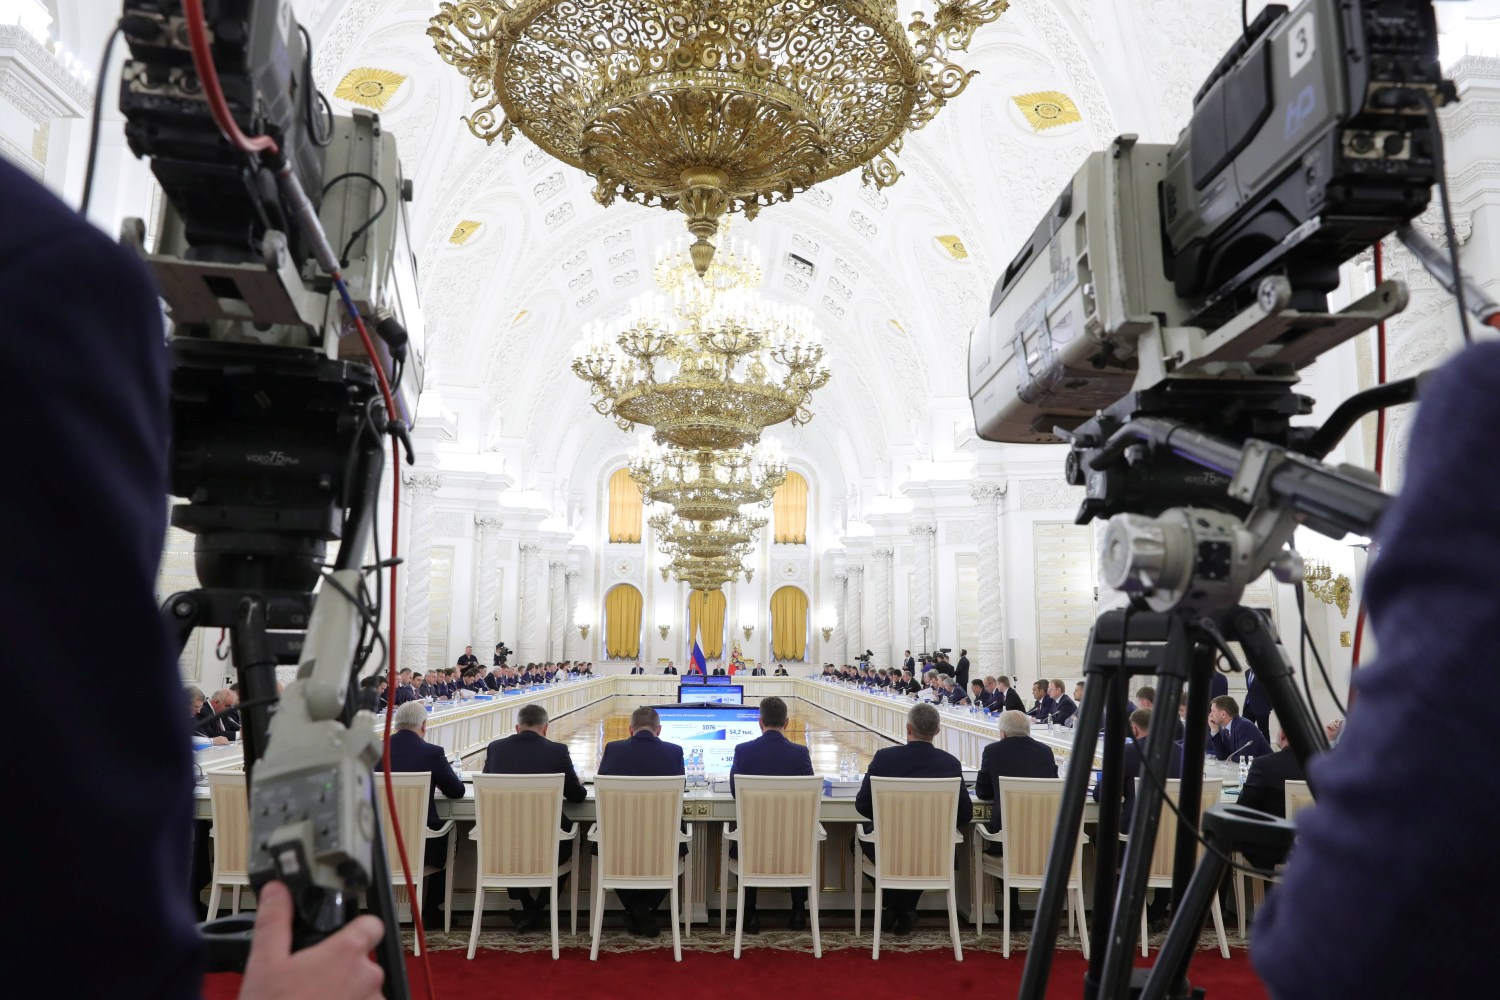 Members of the State Council attend a meeting, chaired by Russian President Vladimir Putin, in Moscow, Russia June 26, 2019. Sputnik/Mikhail Klimentyev/Kremlin via REUTERS ATTENTION EDITORS - THIS IMAGE WAS PROVIDED BY A THIRD PARTY. - RC1D08CAEF20